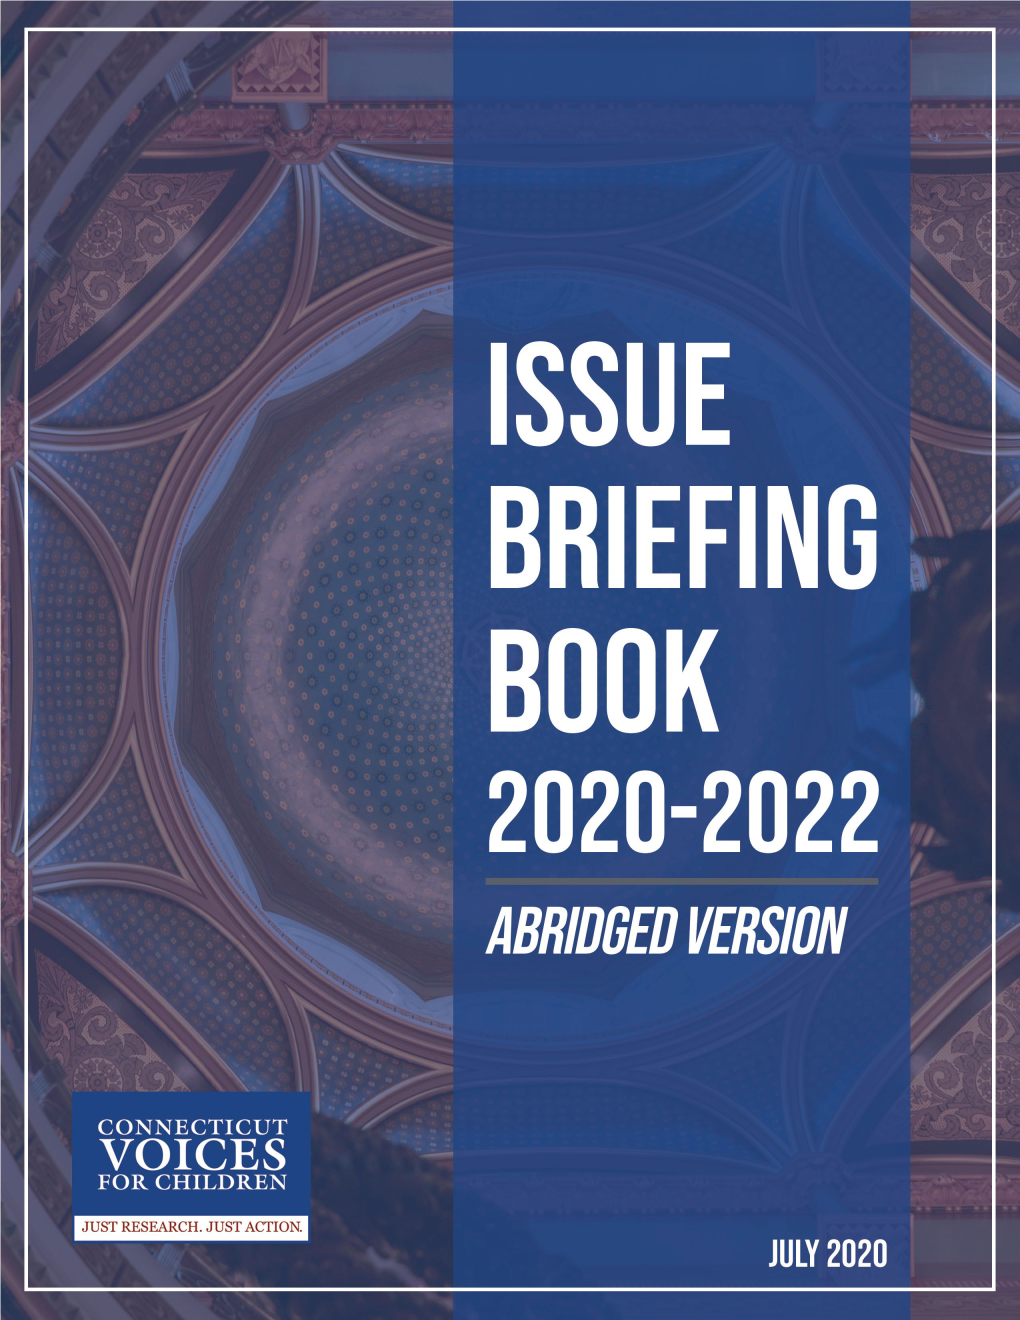 1 Issue Briefing Book